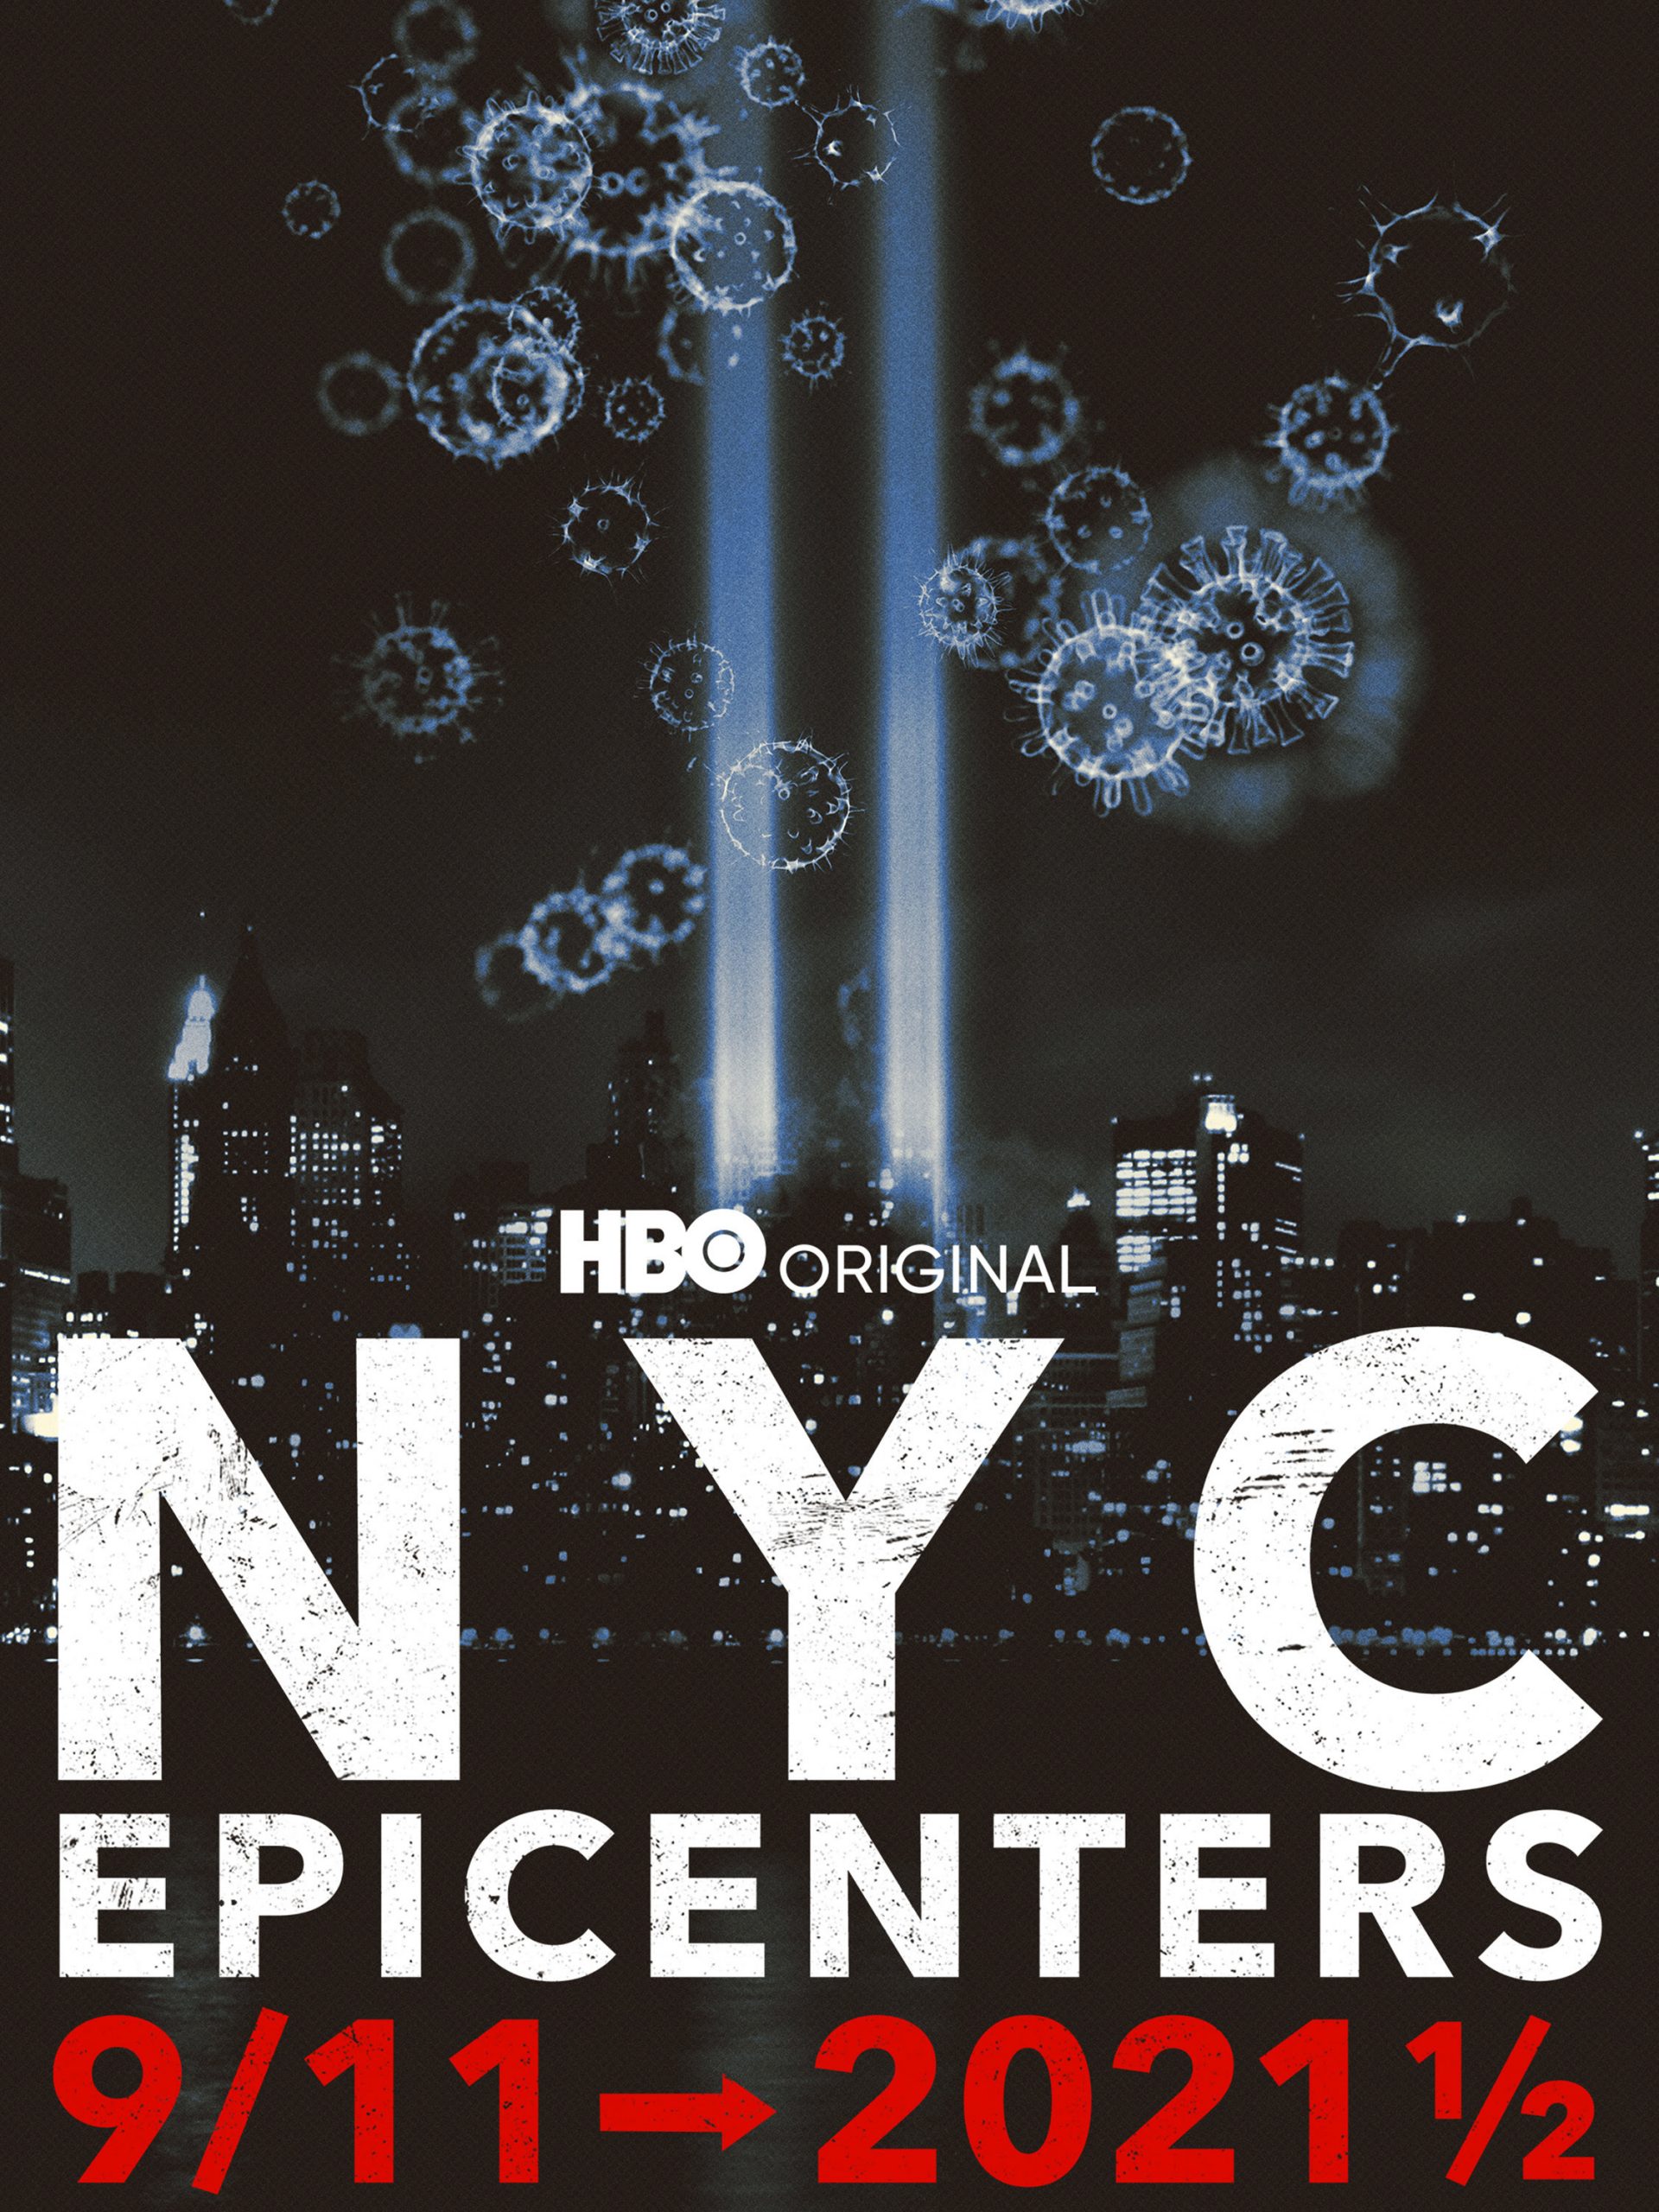 NYC Epicenters 9/11 > 2021 1/2 (2021) Director: Spike Lee Original Music By: Terence Blanchard